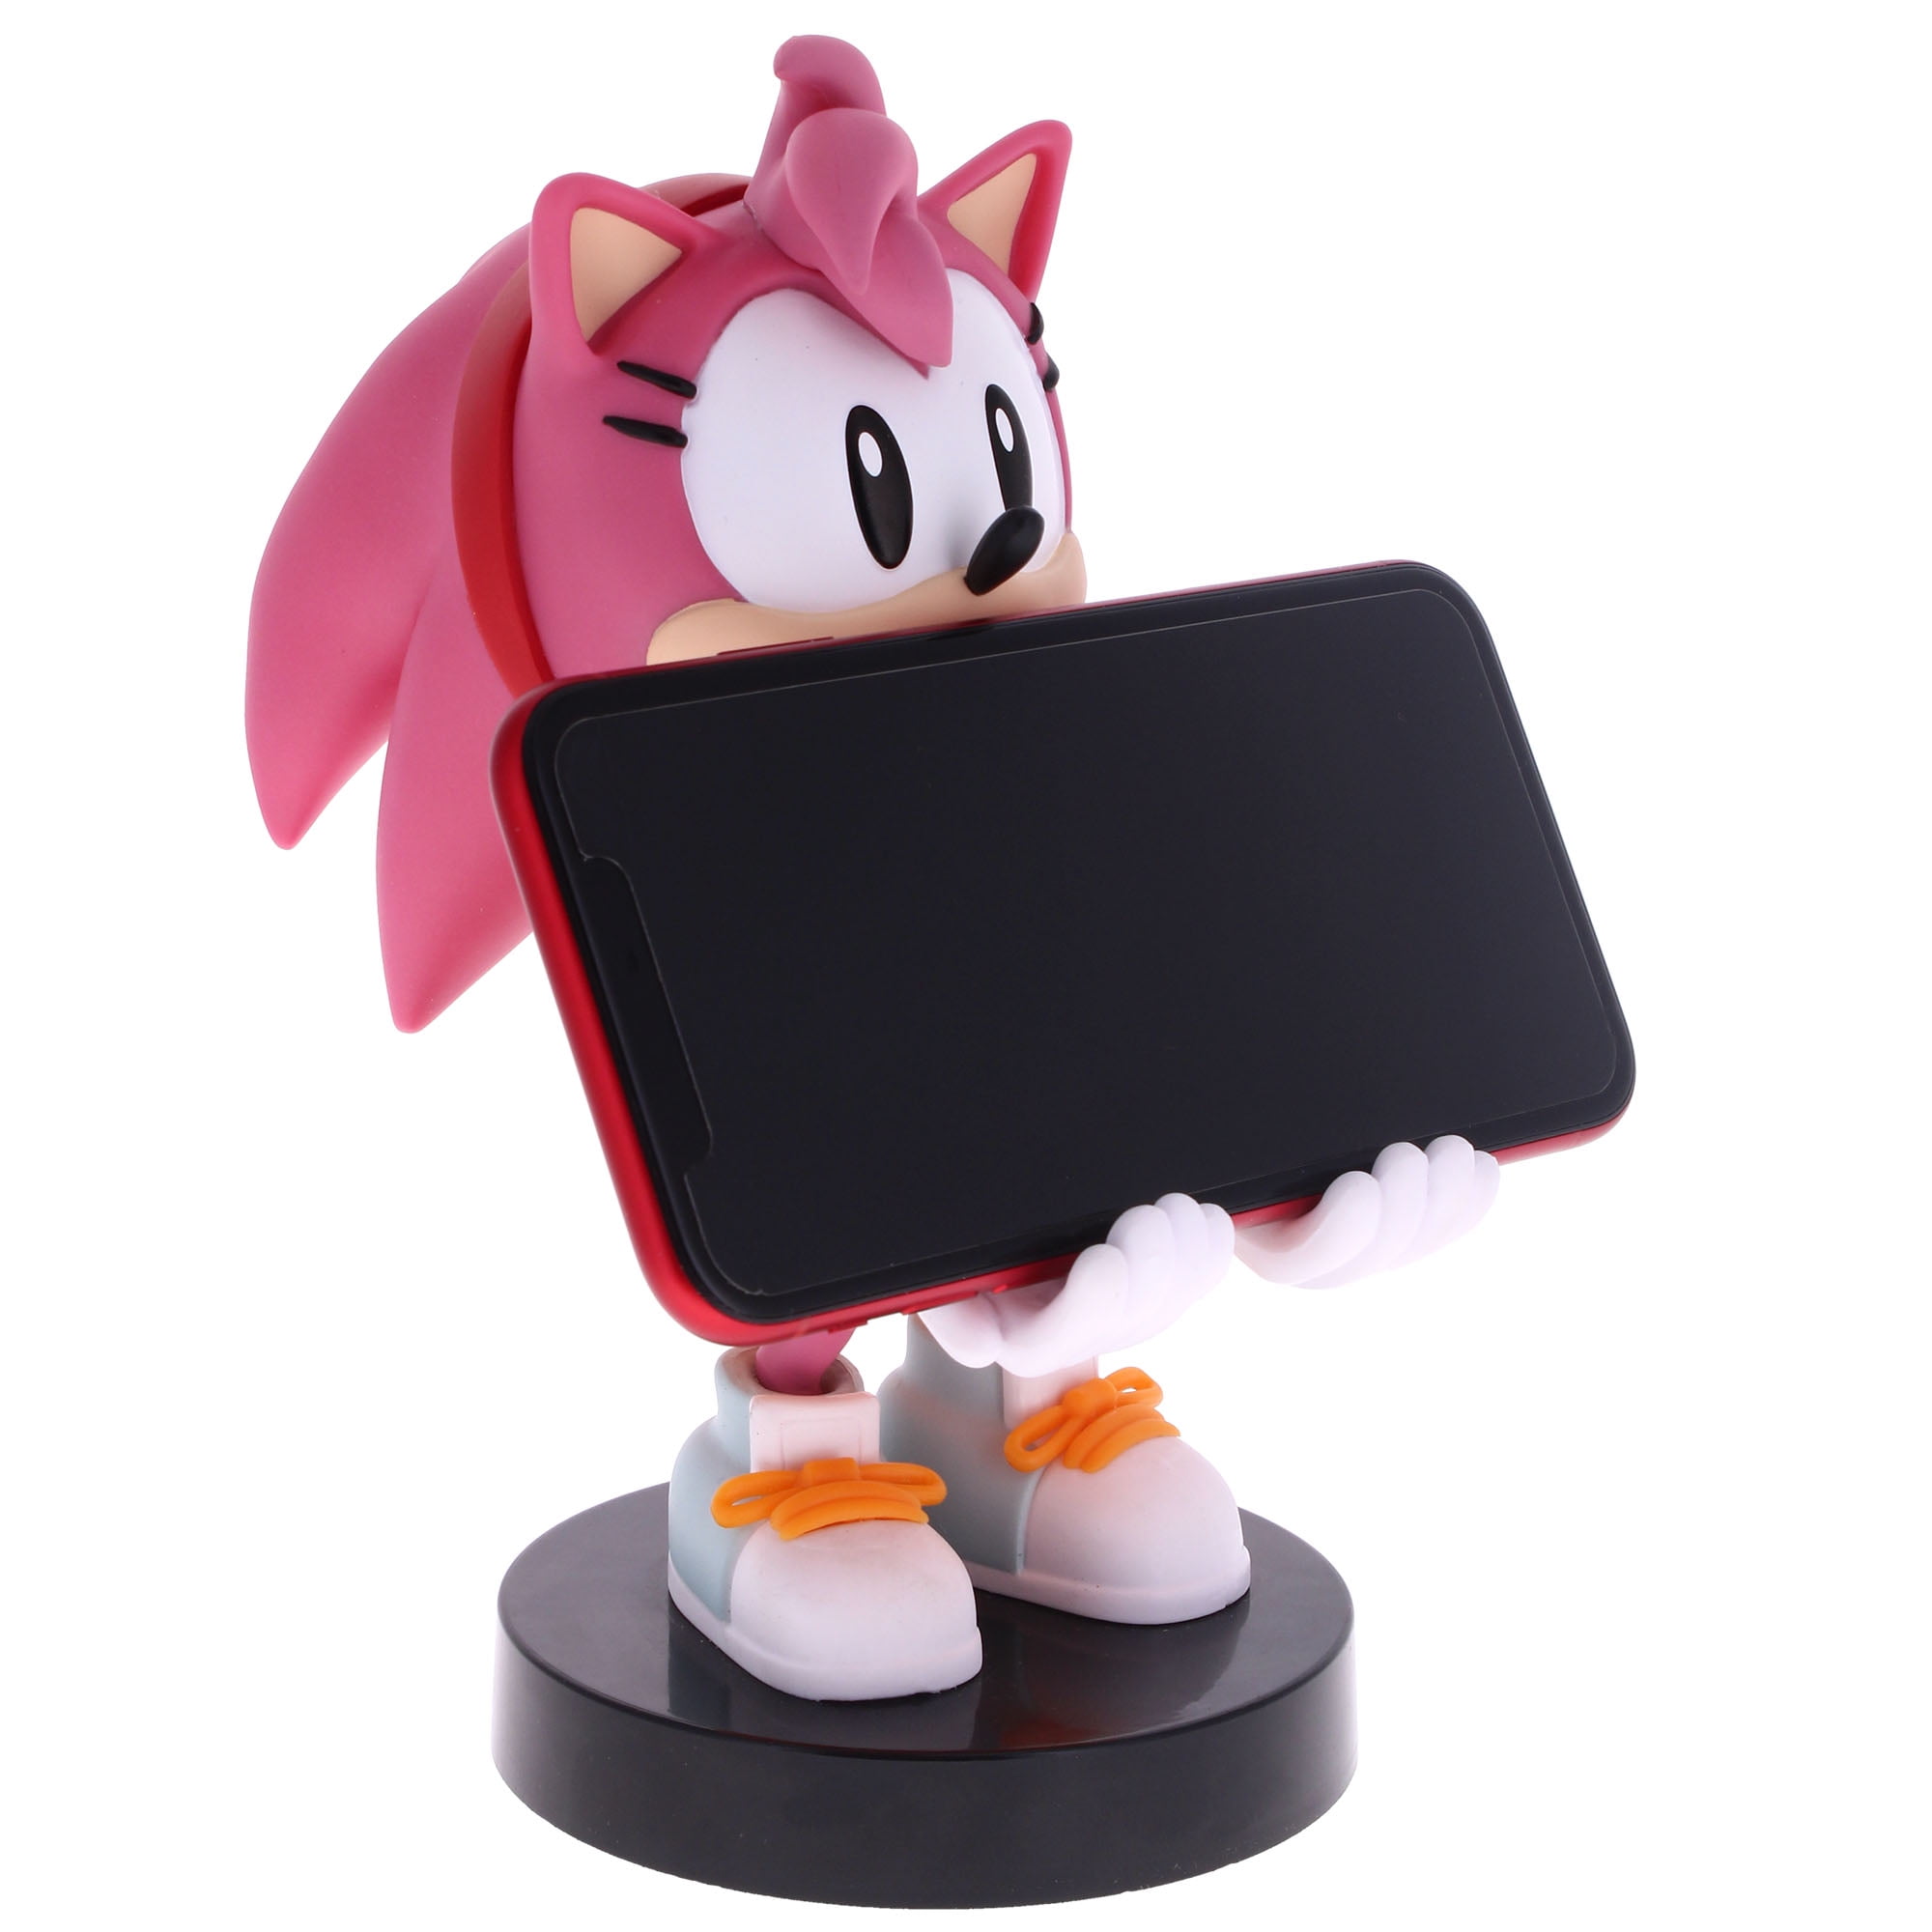 Exquisite Gaming: SEGA: Knuckles - Original Mobile Phone & Gaming  Controller Holder, Device Stand, Cable Guys, Sonic The Hedgehog Licensed  Figure